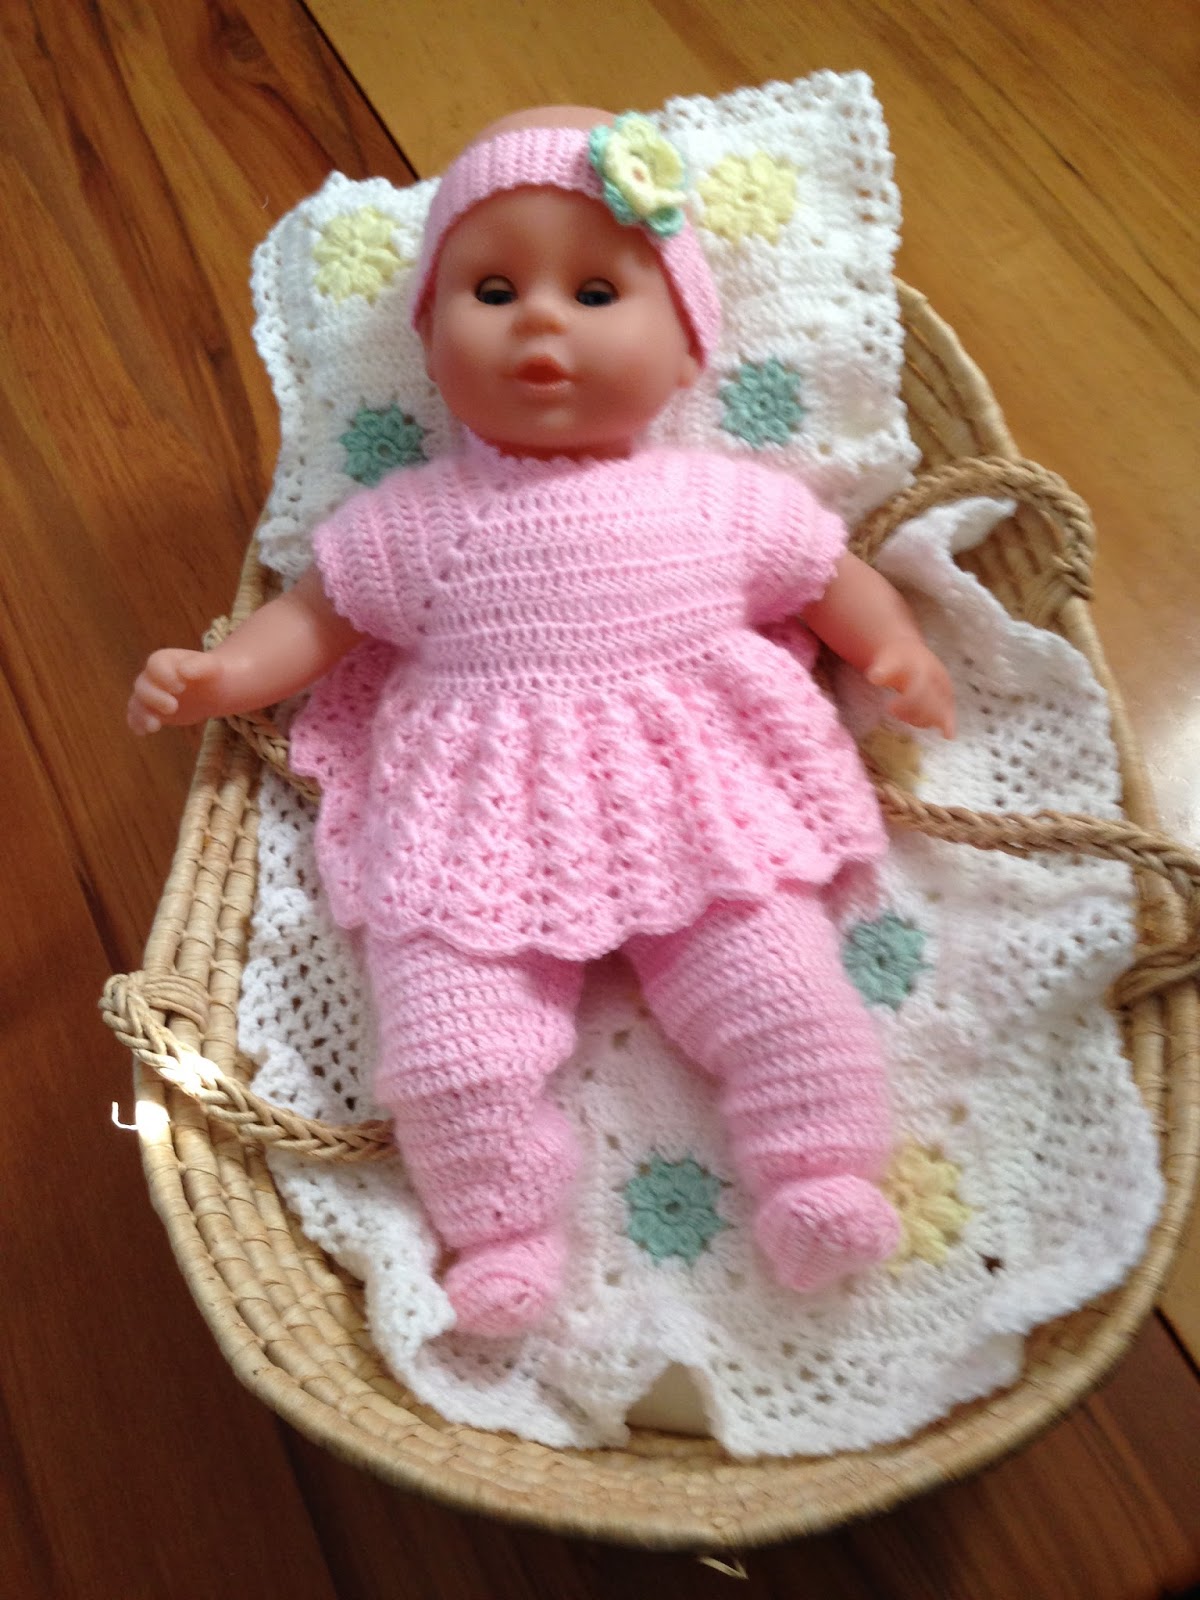 Sew Little Time: Crochet Baby Doll Clothes